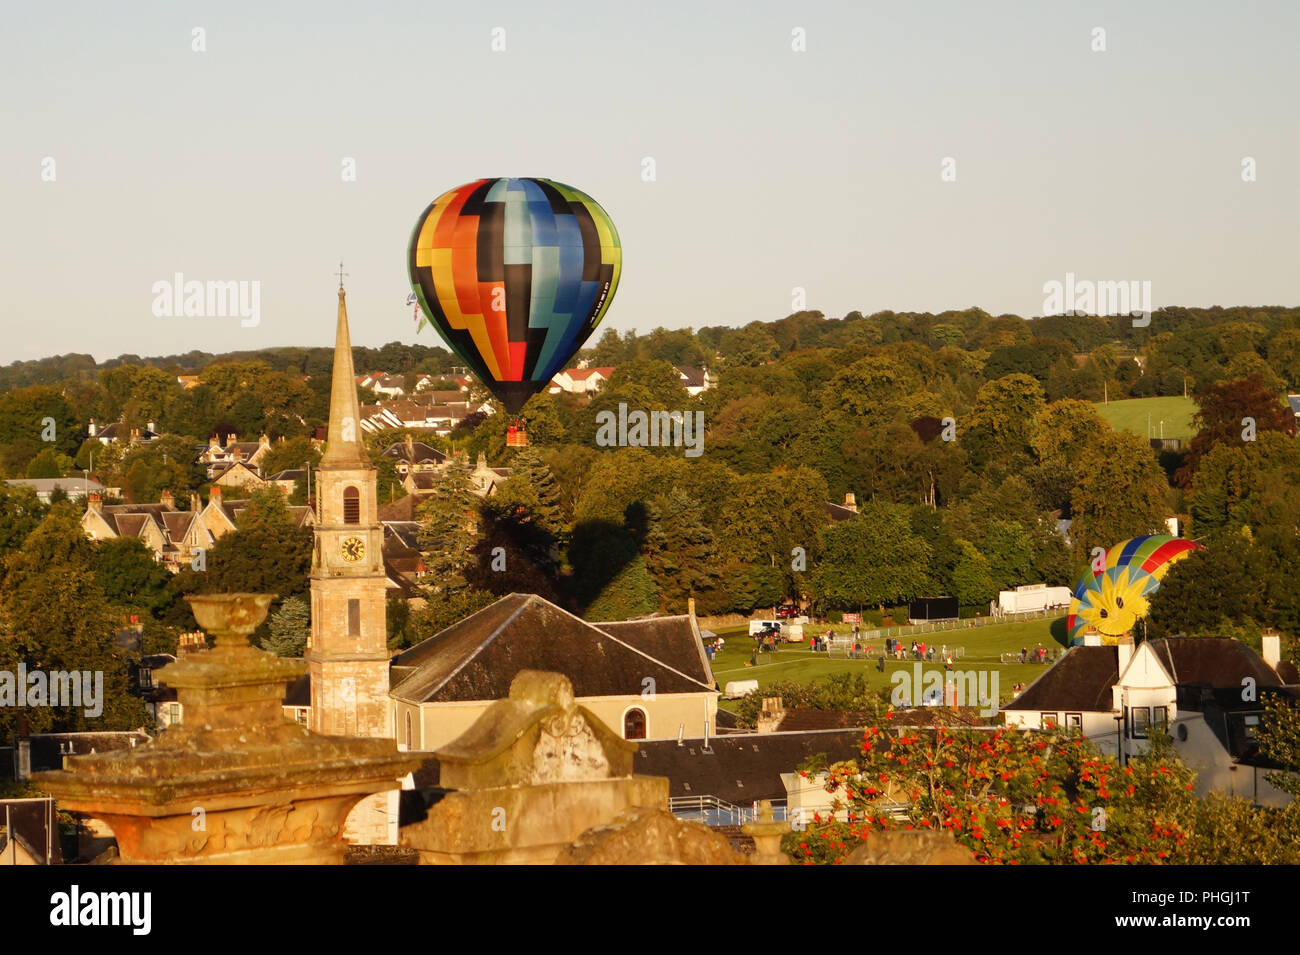 Strathaven Hot Air Balloon Festival 2018 - Small Town Entertainment, Colourful Balloons taking off over the town, Up Up and Away Stock Photo